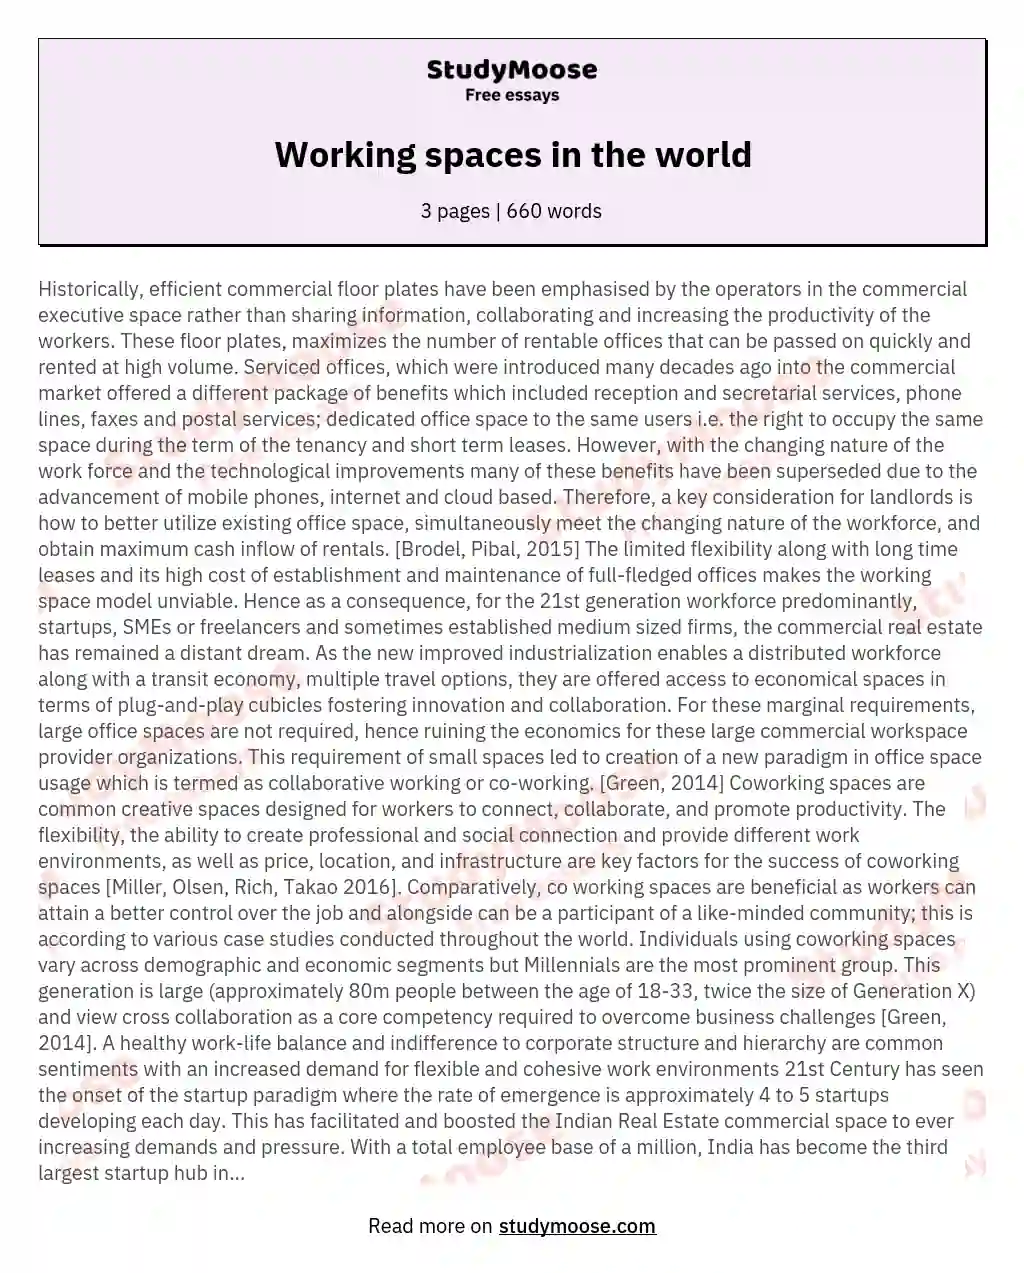 Working spaces in the world essay